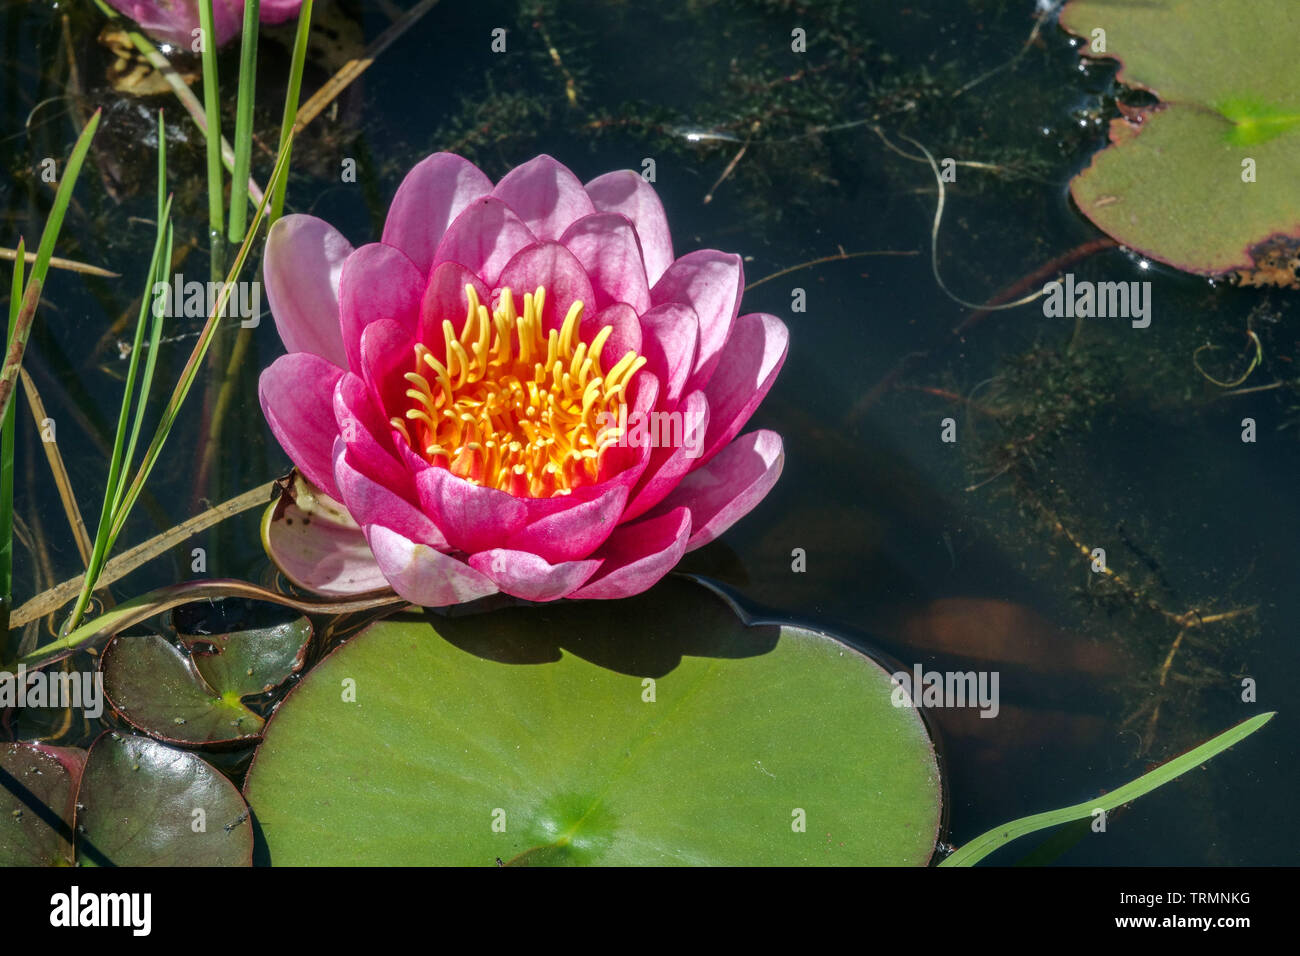 Pink water lily flower in a garden pond Stock Photo